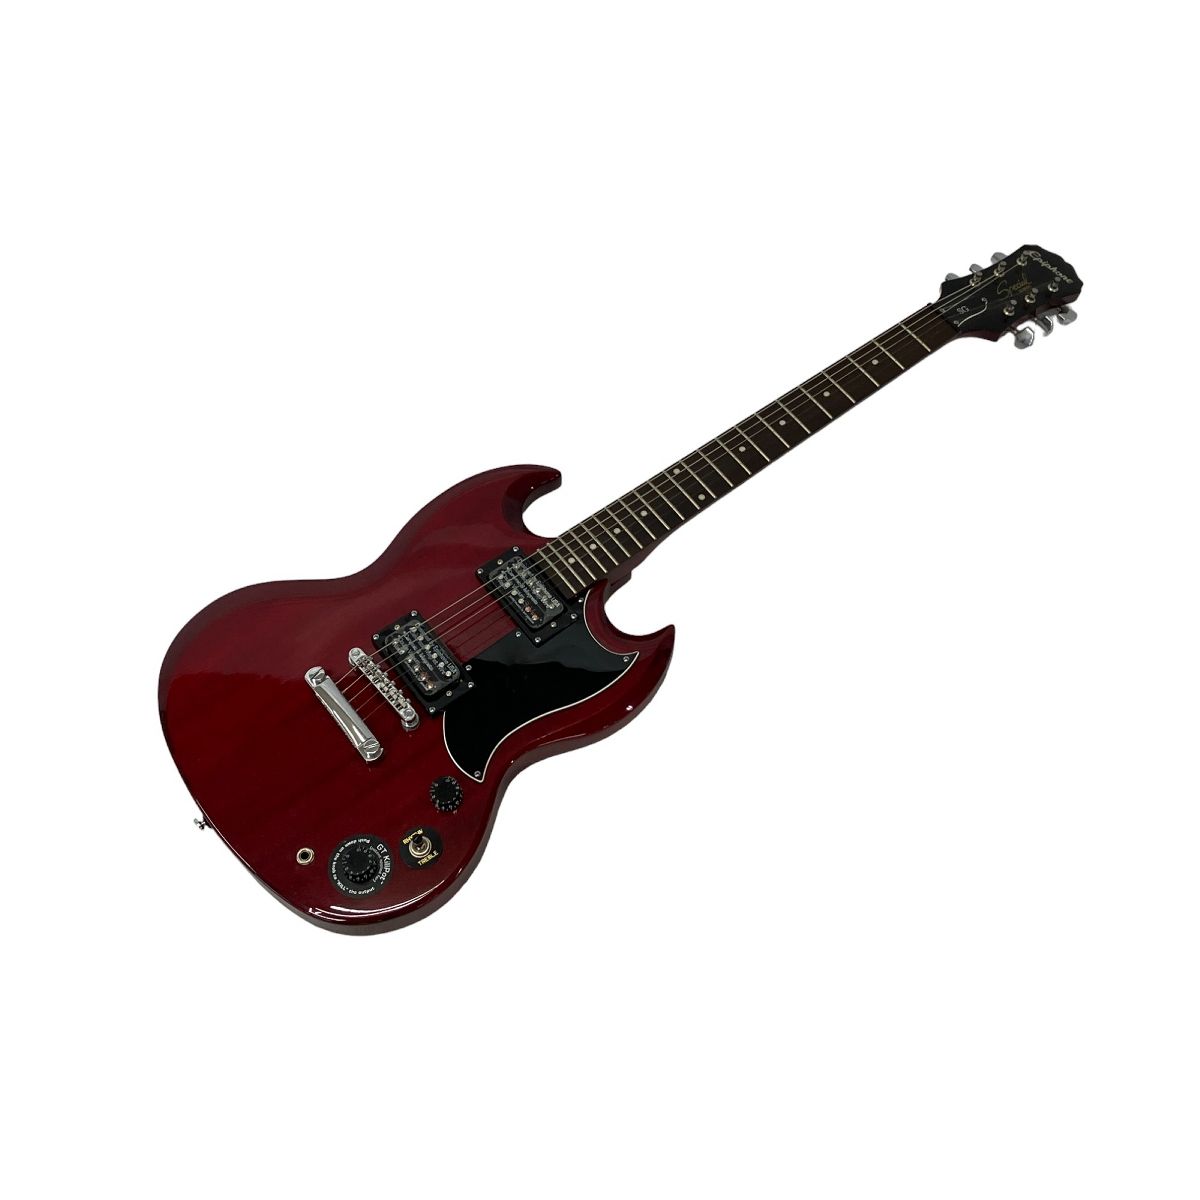 Epiphone 【動作保証】Epiphone Special SG Model エレキギター 弦楽器 エピフォン  W8903157